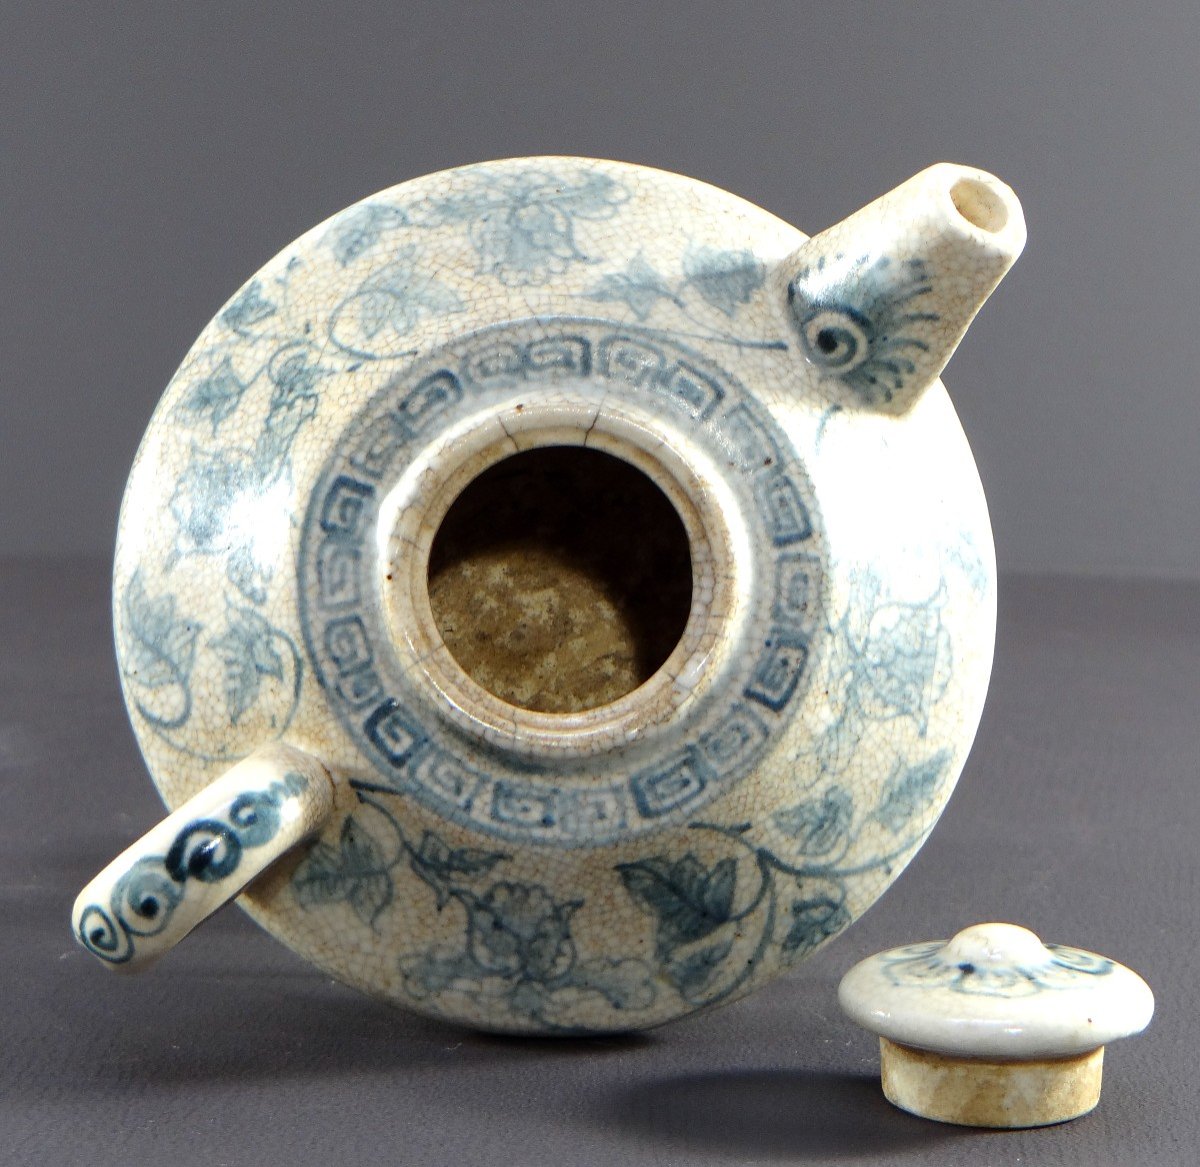 Vietnam, Mid-20th Century, Cracked Porcelain Teapot With Floral Decor In Blue.-photo-1